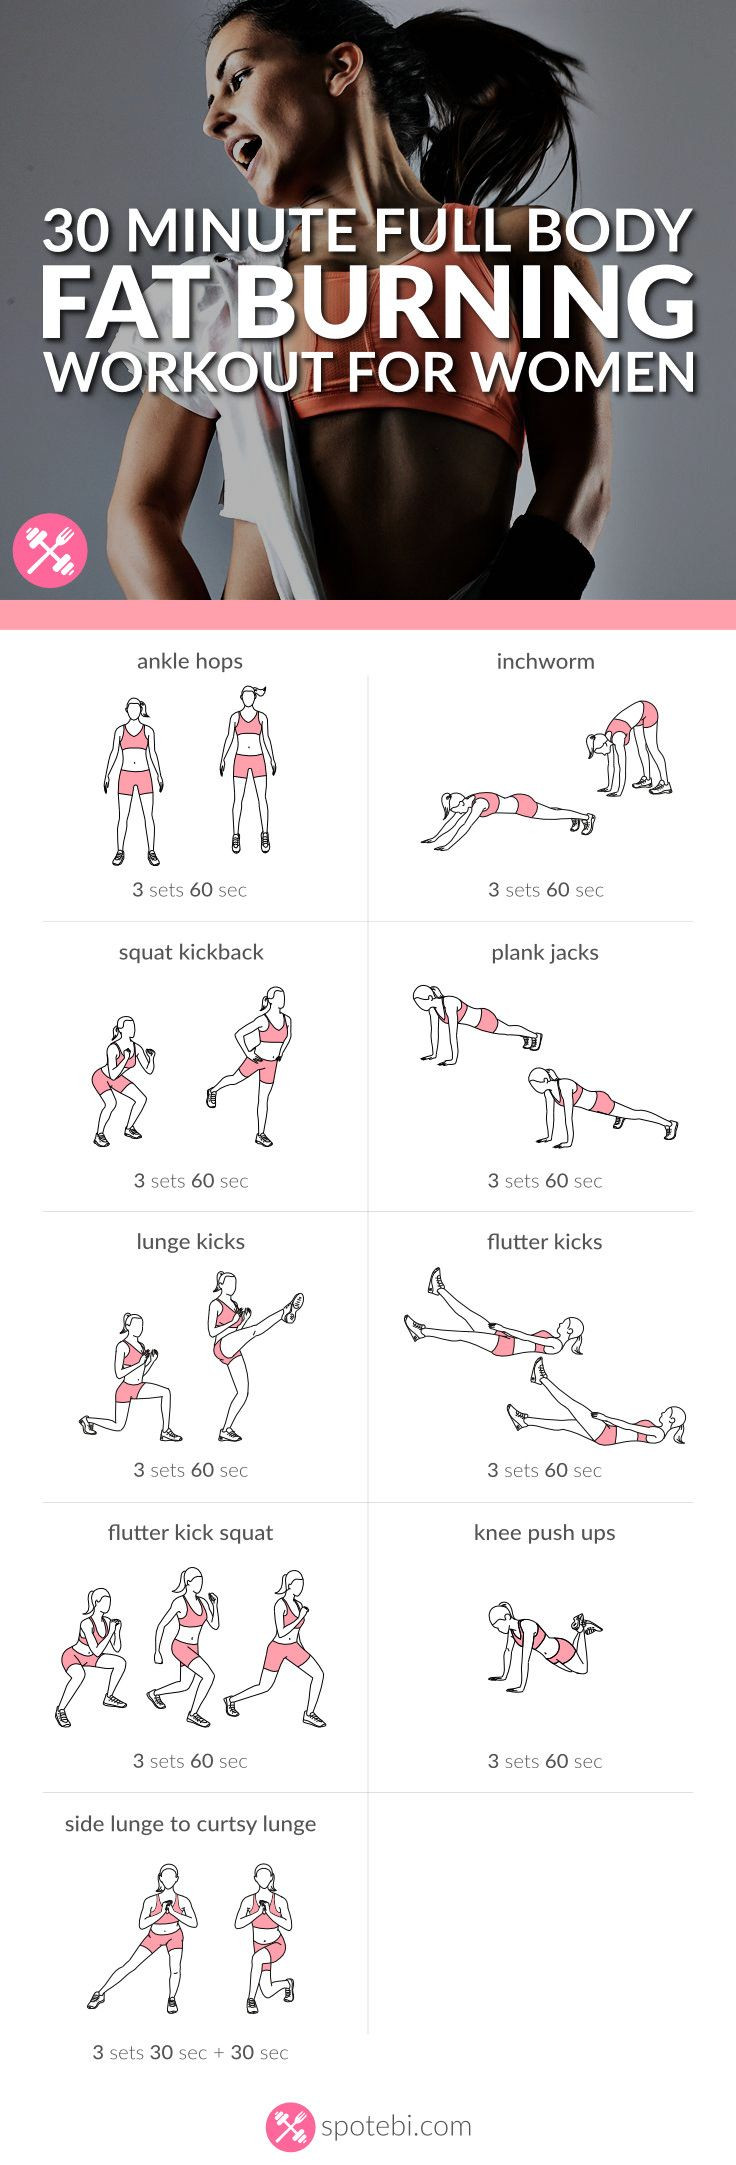 Full Body Fat Burning Workout
 Pin on Getting in shape